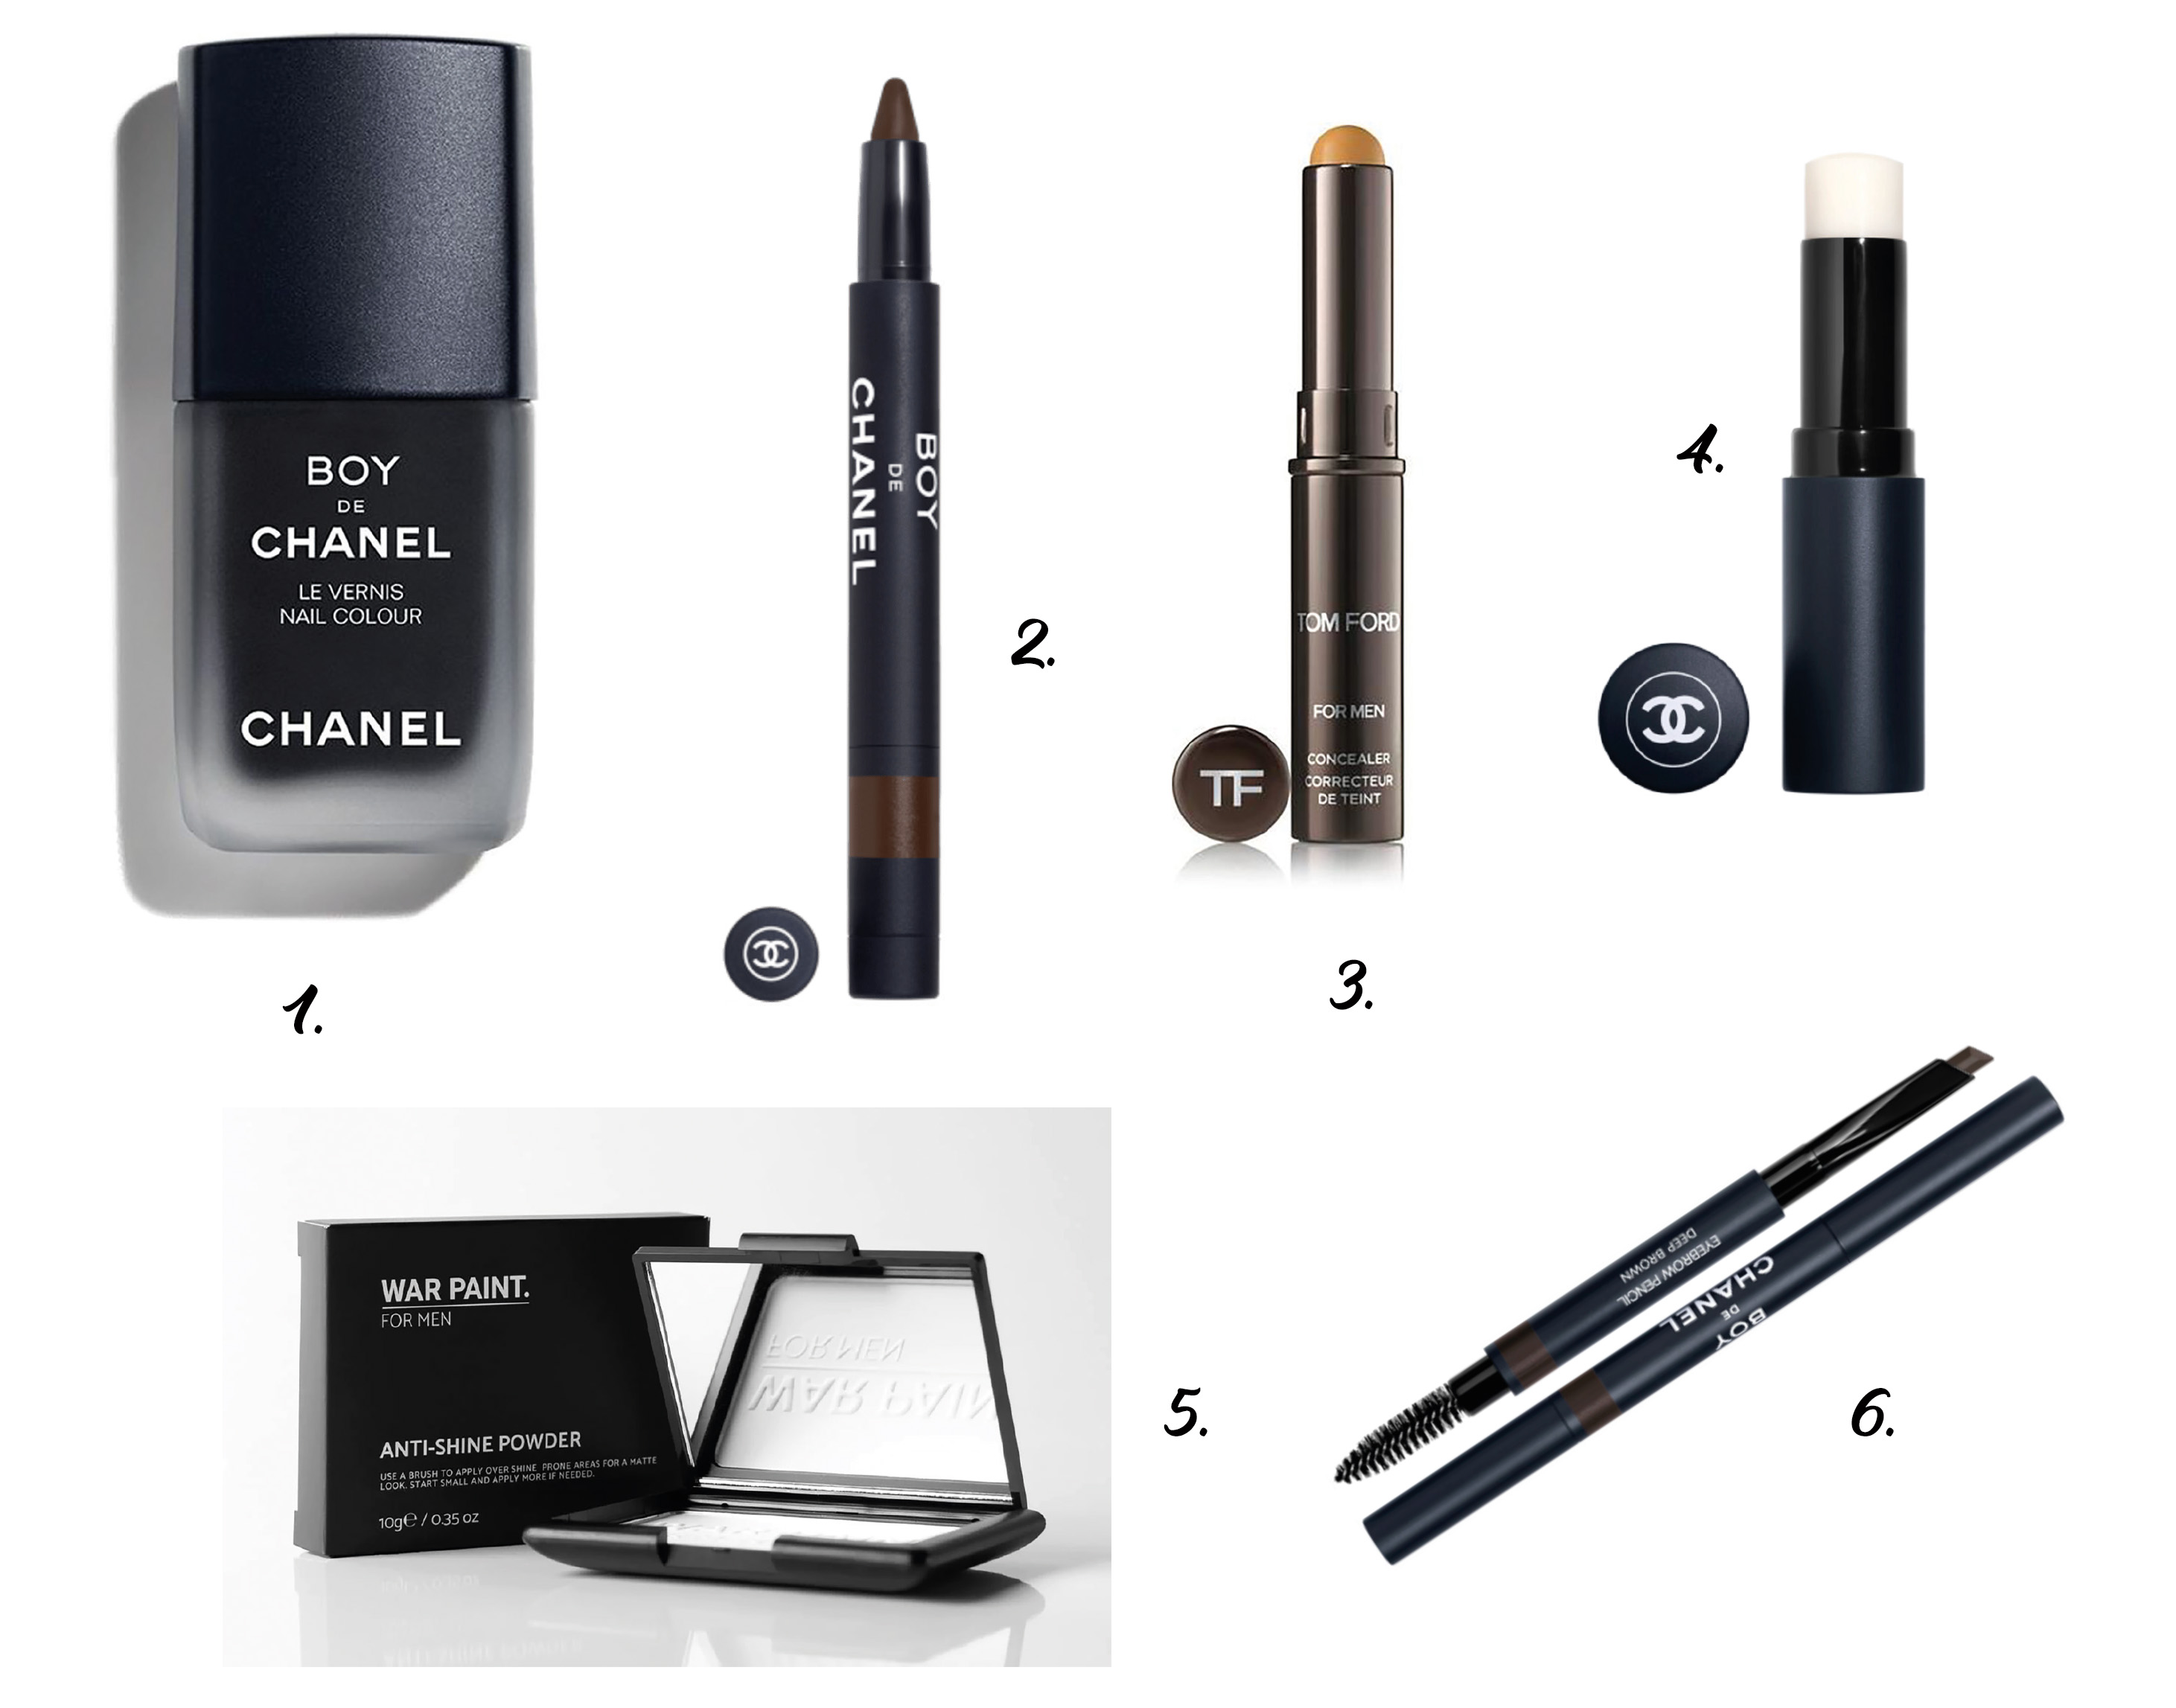 Our Editor Tests the New Boy de Chanel Makeup Collection for Men   Coveteur Inside Closets Fashion Beauty Health and Travel